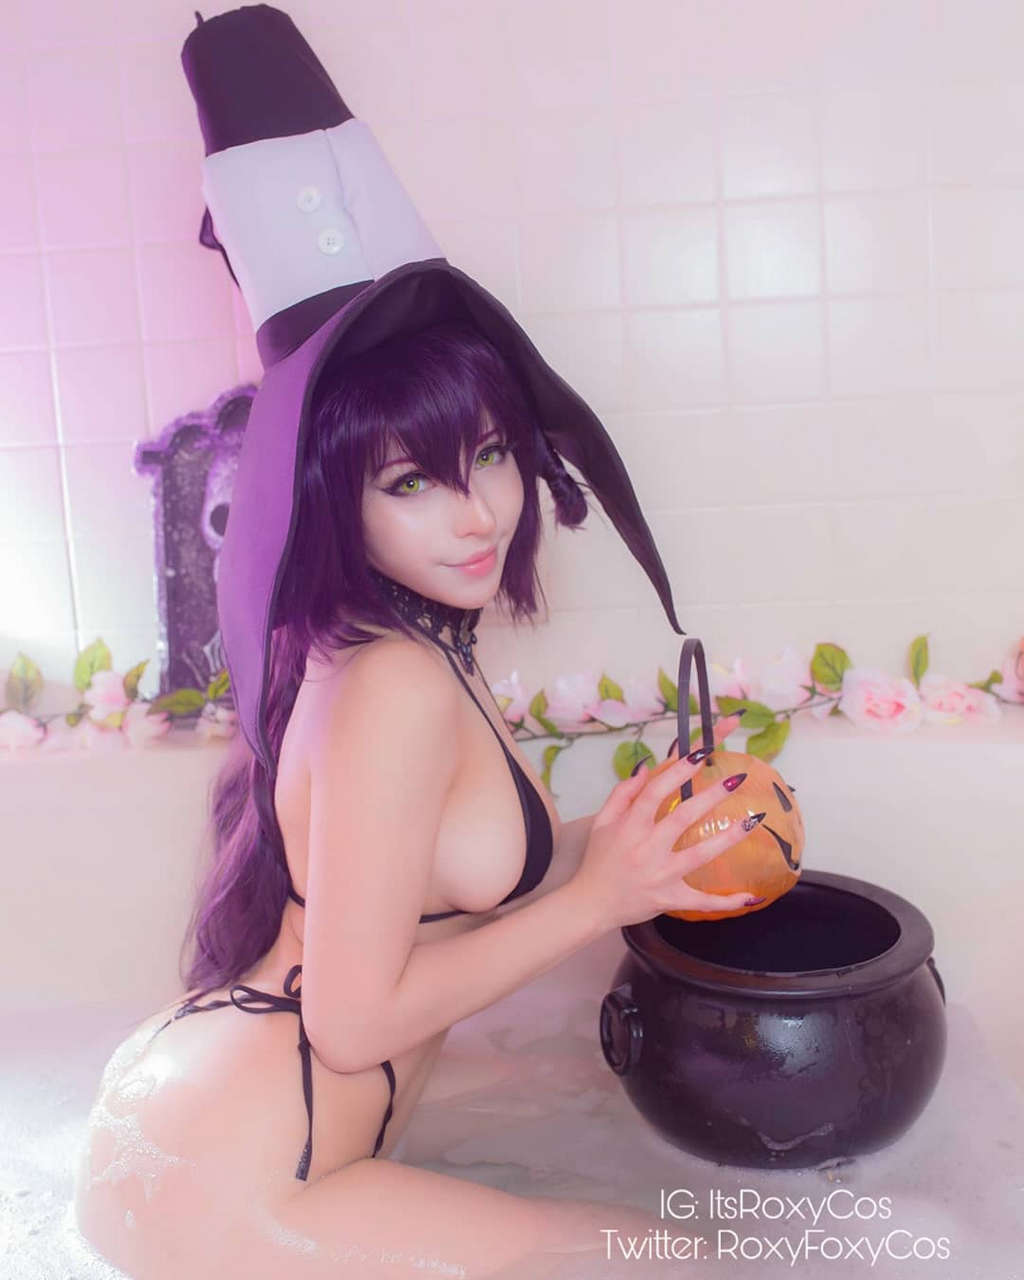 Blair Soul Eater By Roxy Itsroxycos 0